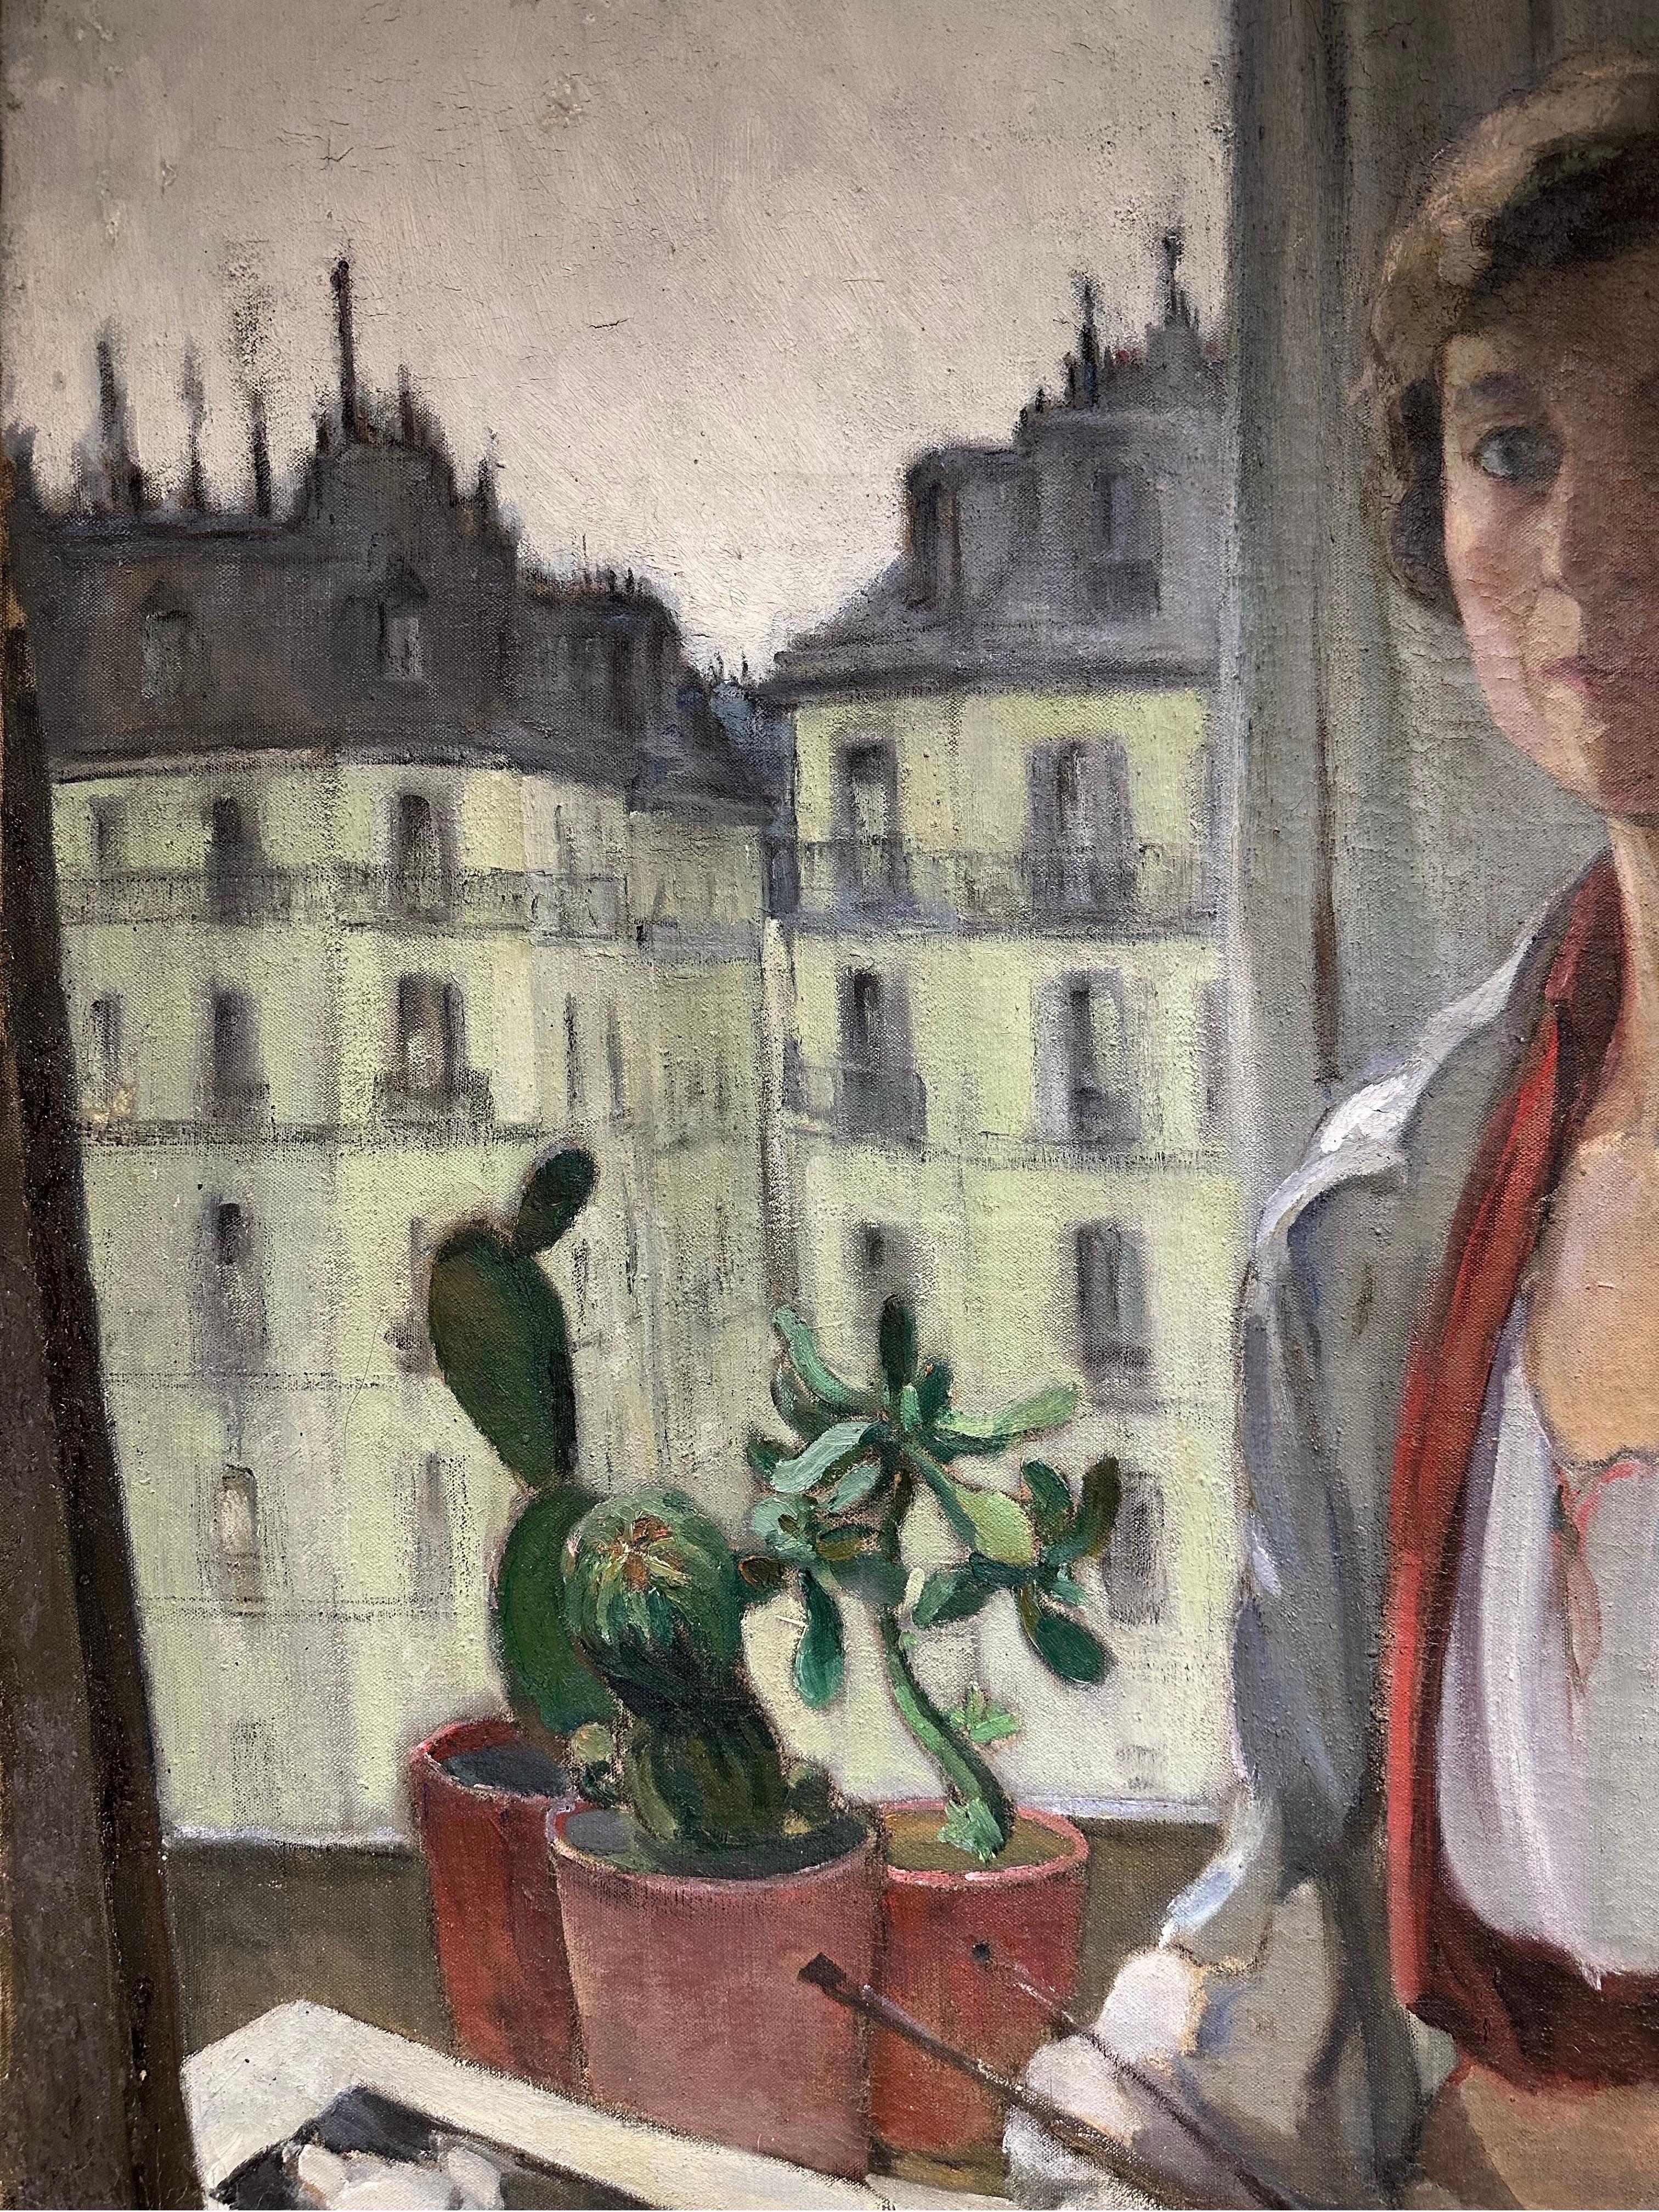 Self Portrait of the Artist, Paris
by Louise Alix (French, 1888-1980) *see notes below
signed lower front corner, inscribed verso with the artists Paris address
oil painting on canvas unframed
measures: 39.5 inches high by 32 inches wide
condition: